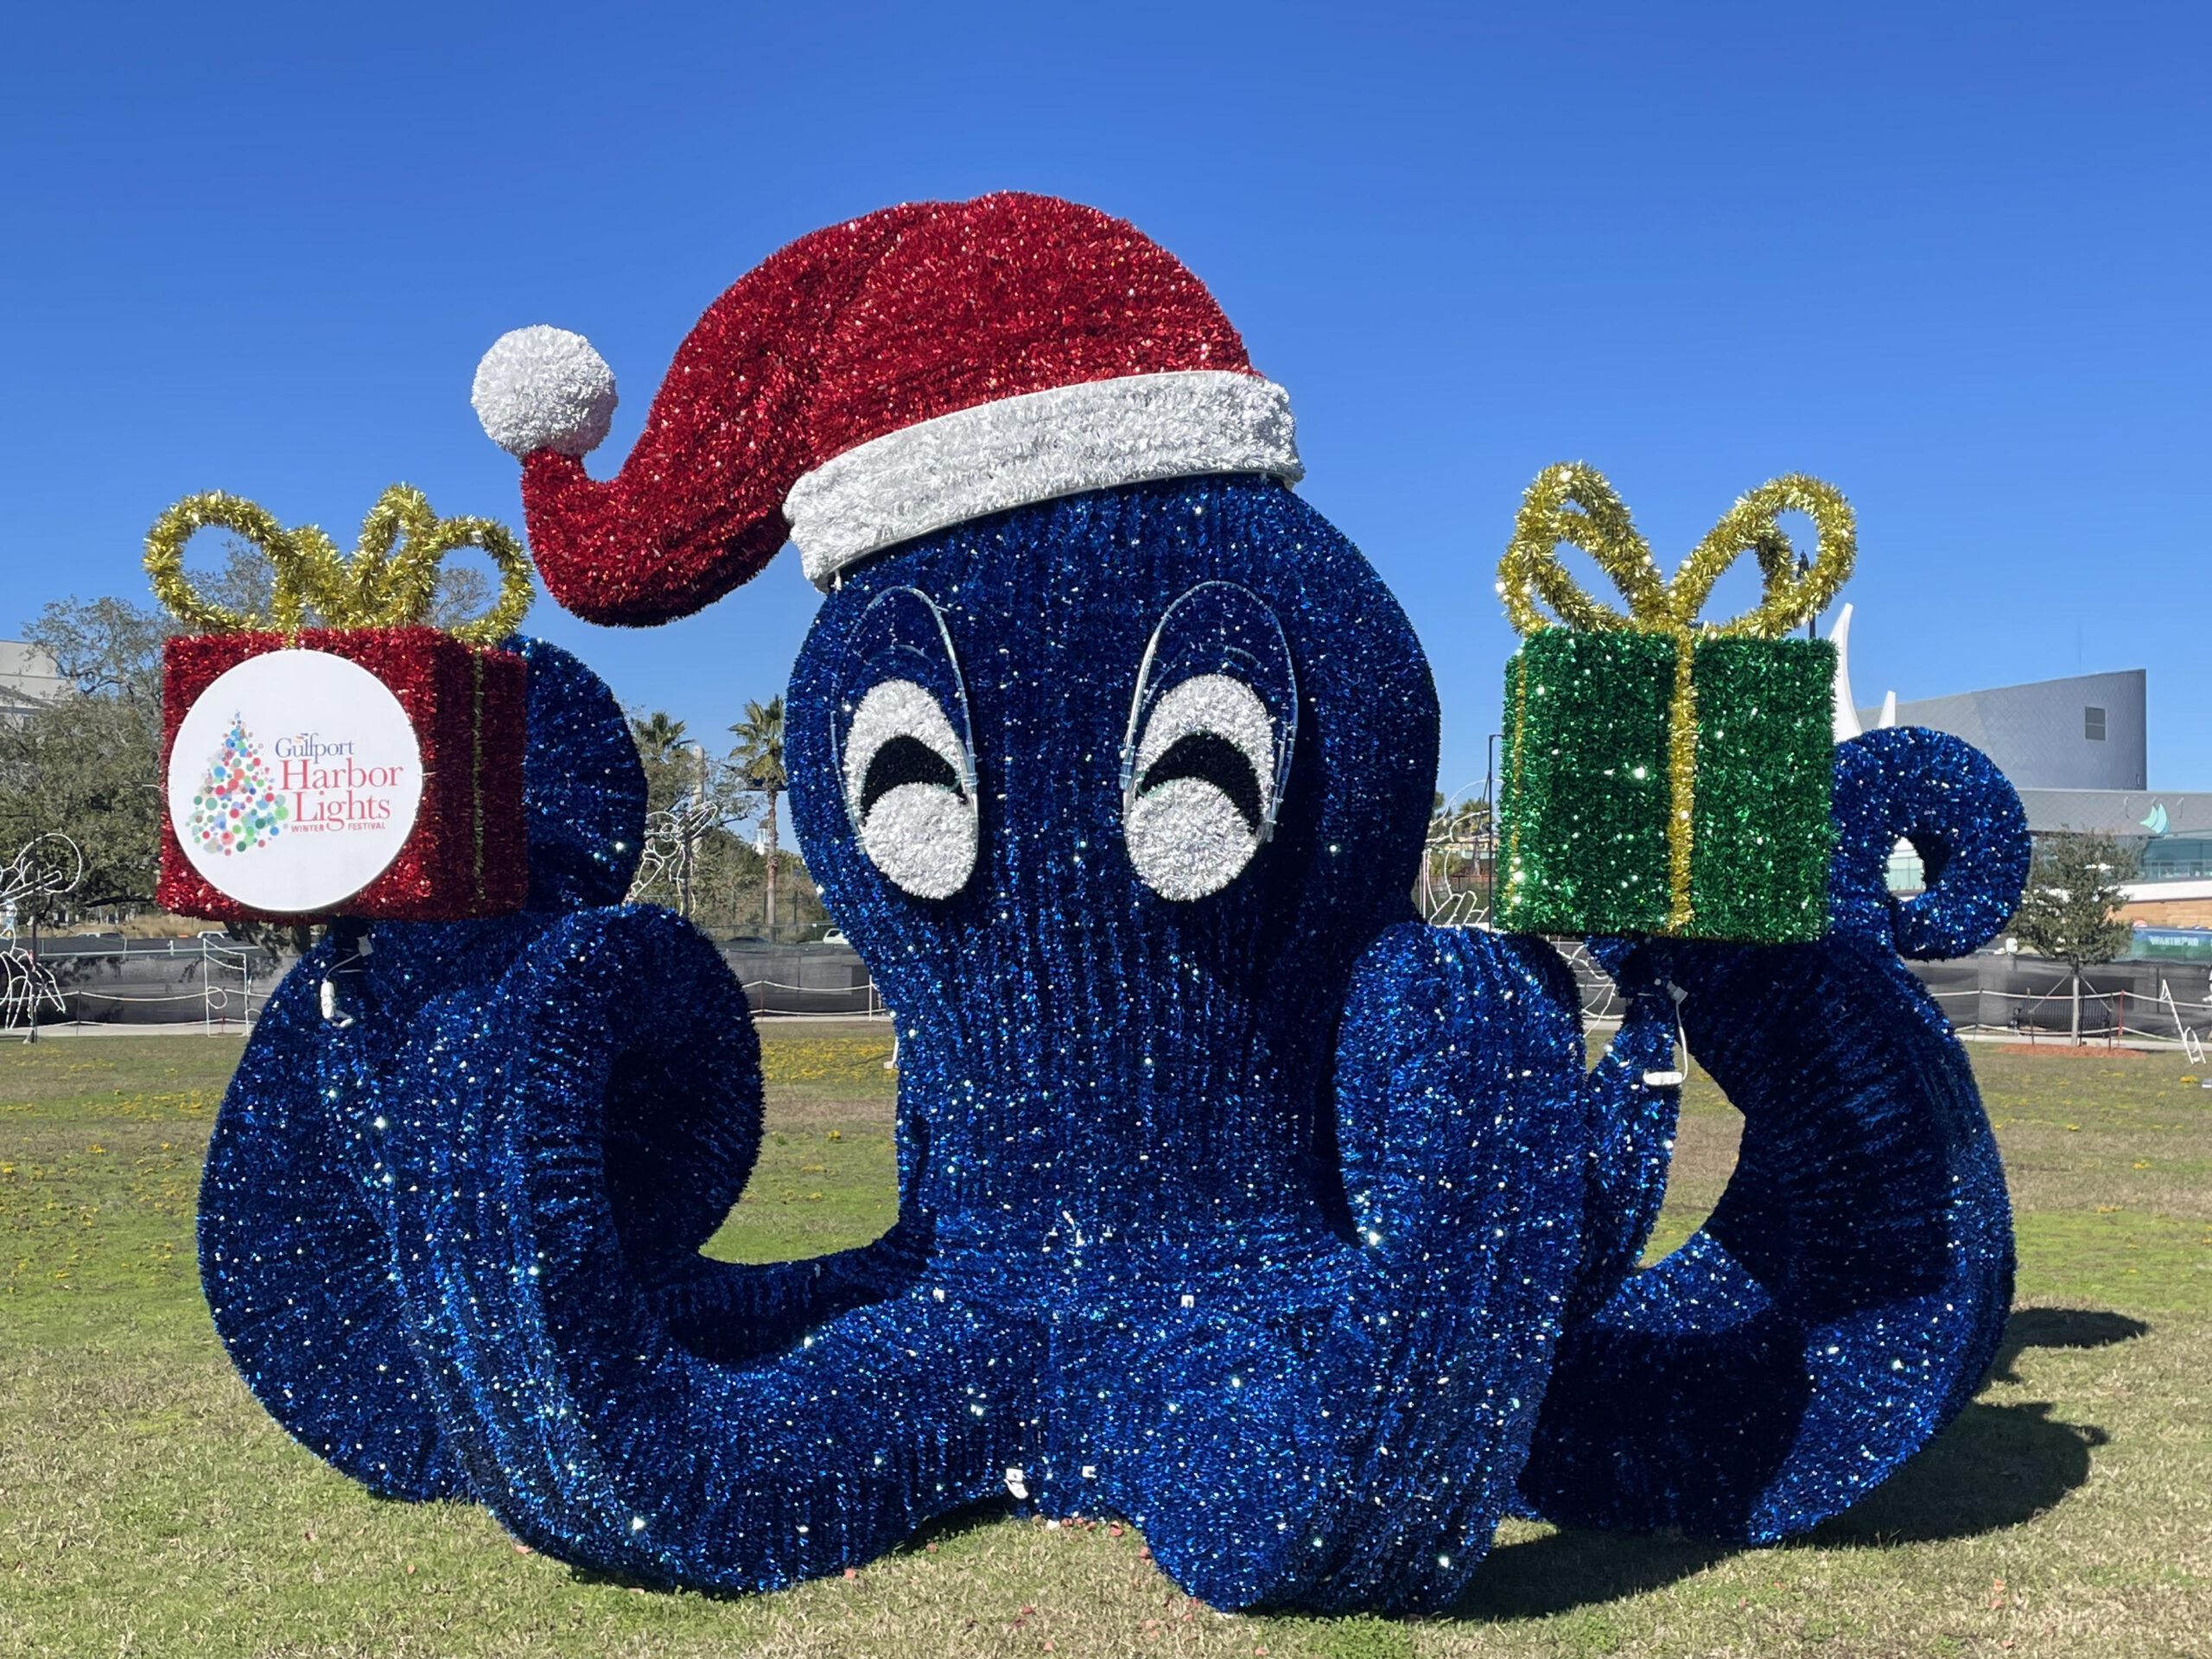 a giant octopus decorated with garland and lights, provided by Universal Concepts for the city of Gulfport at Jones Park.